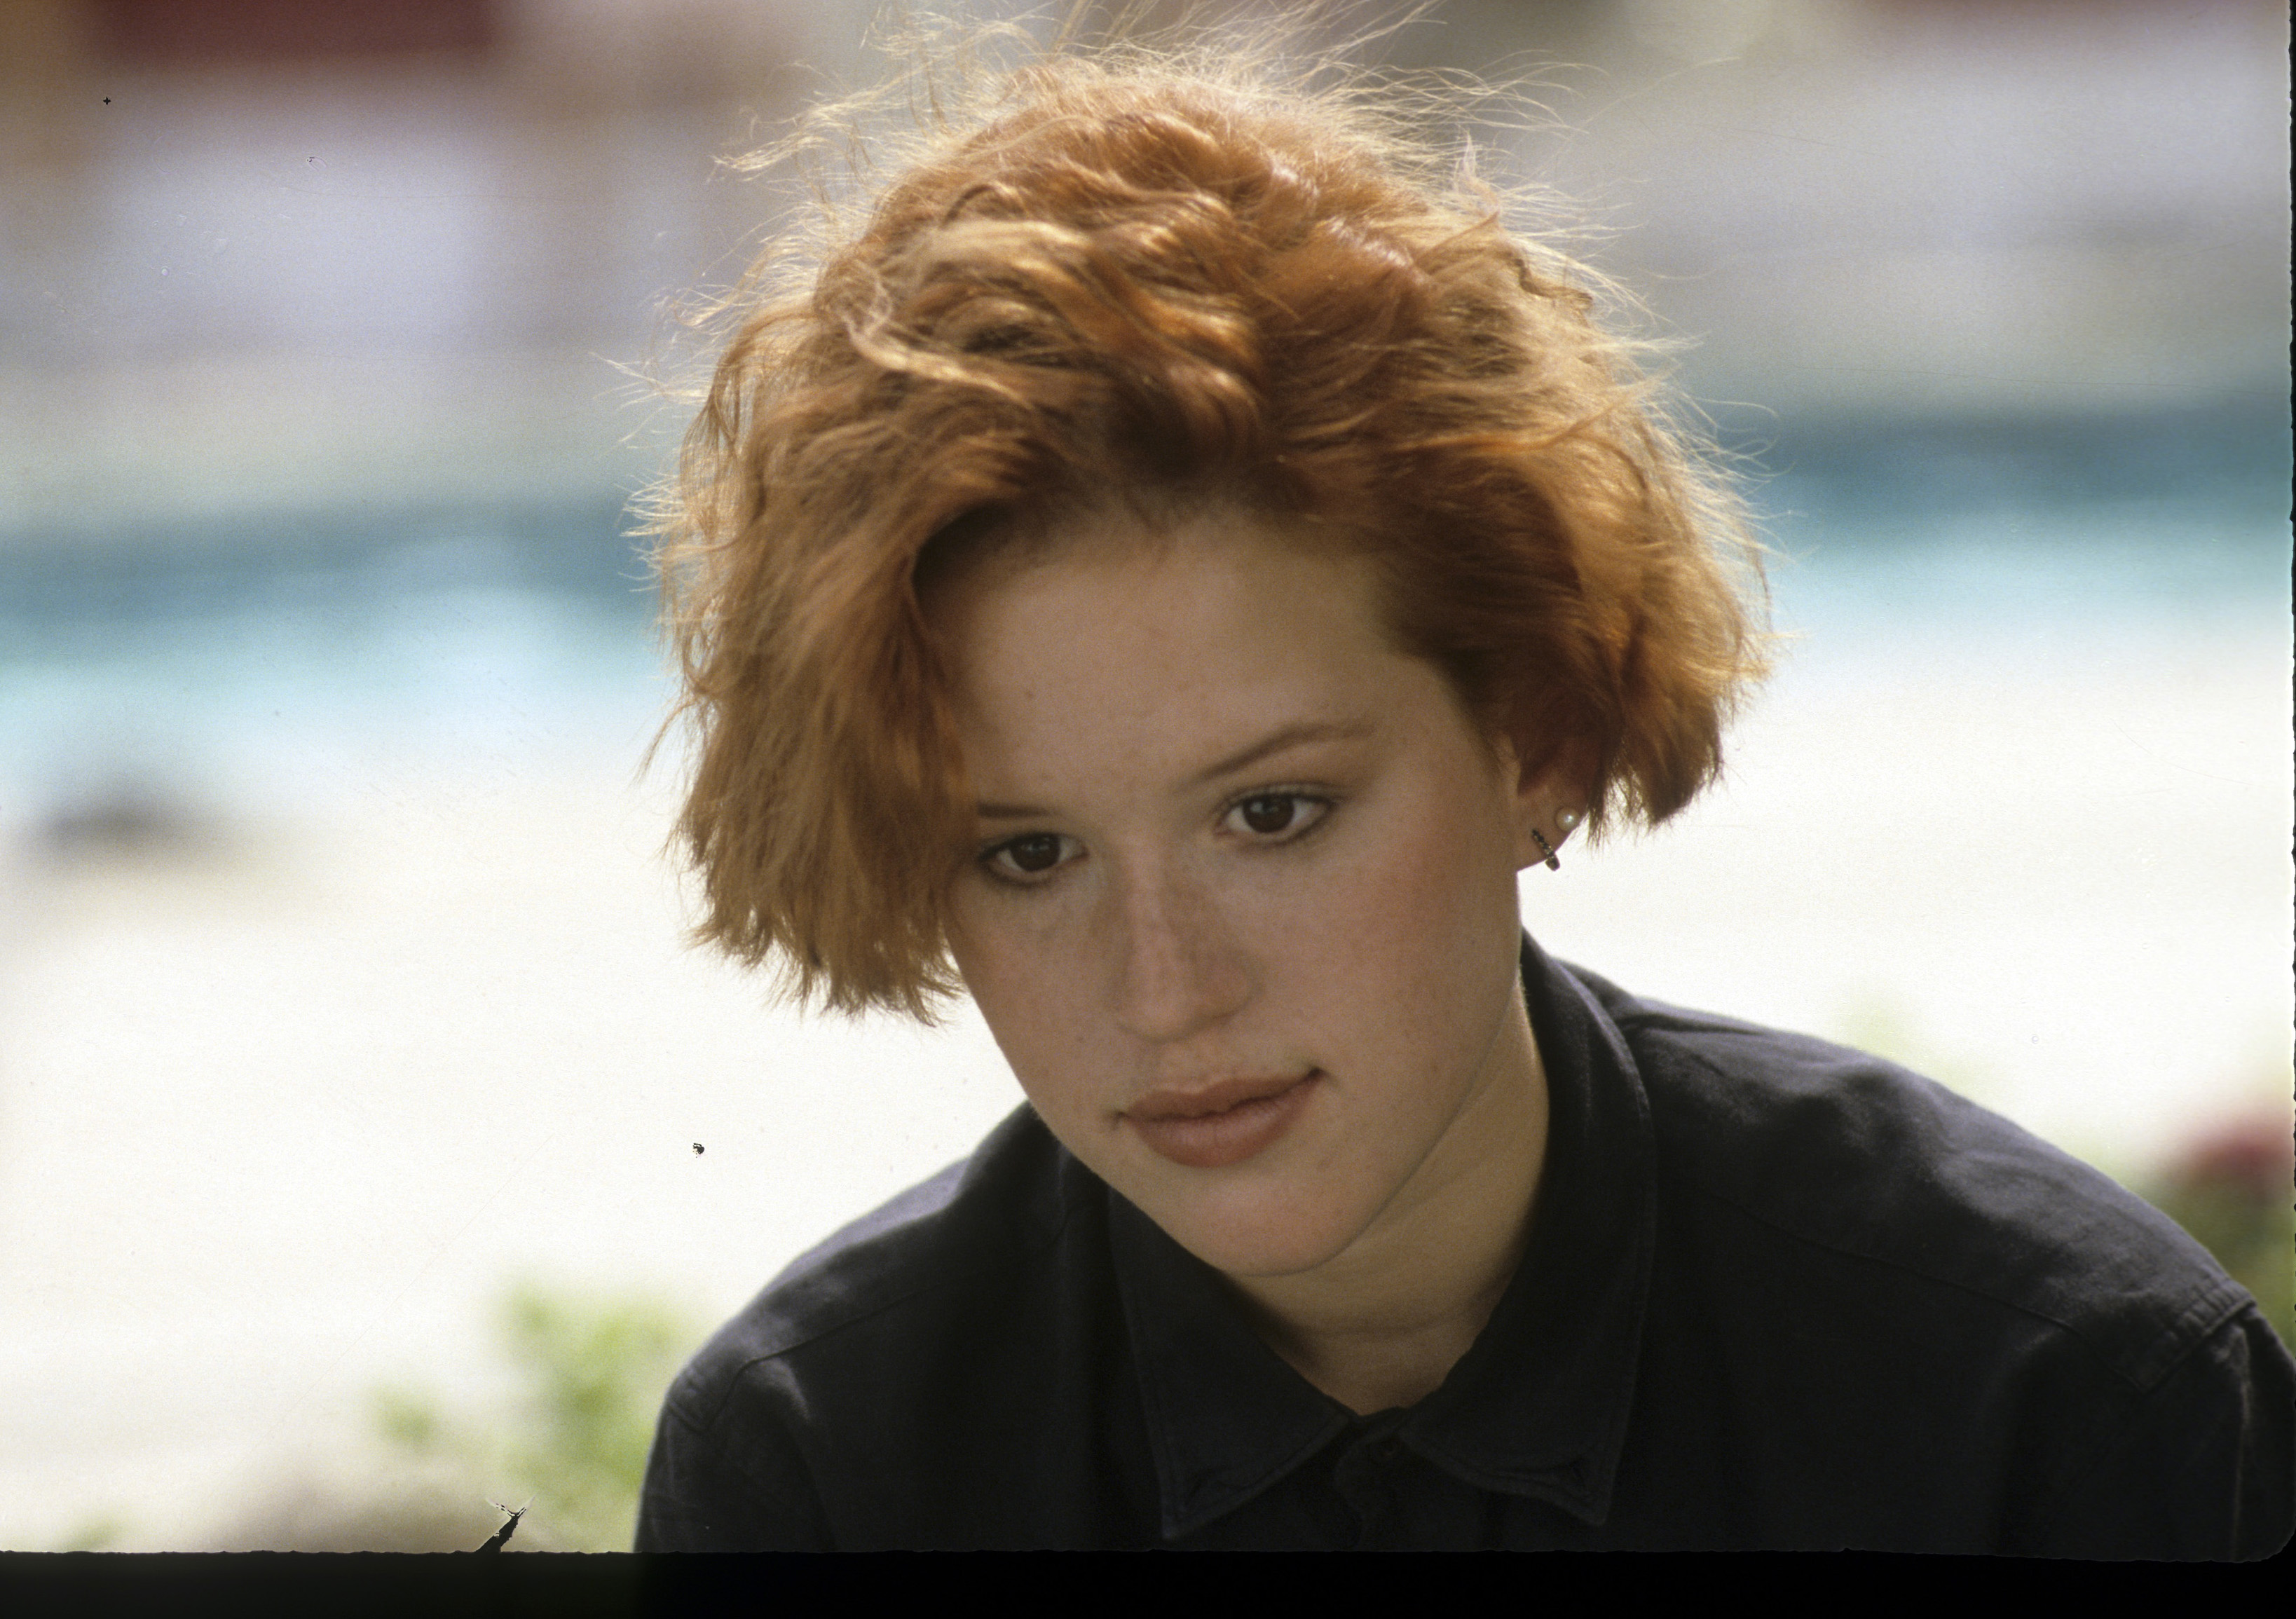 Molly Ringwald on the set of "Surviving: A Family Crisis" on February 10, 1985 | Source: Getty Images